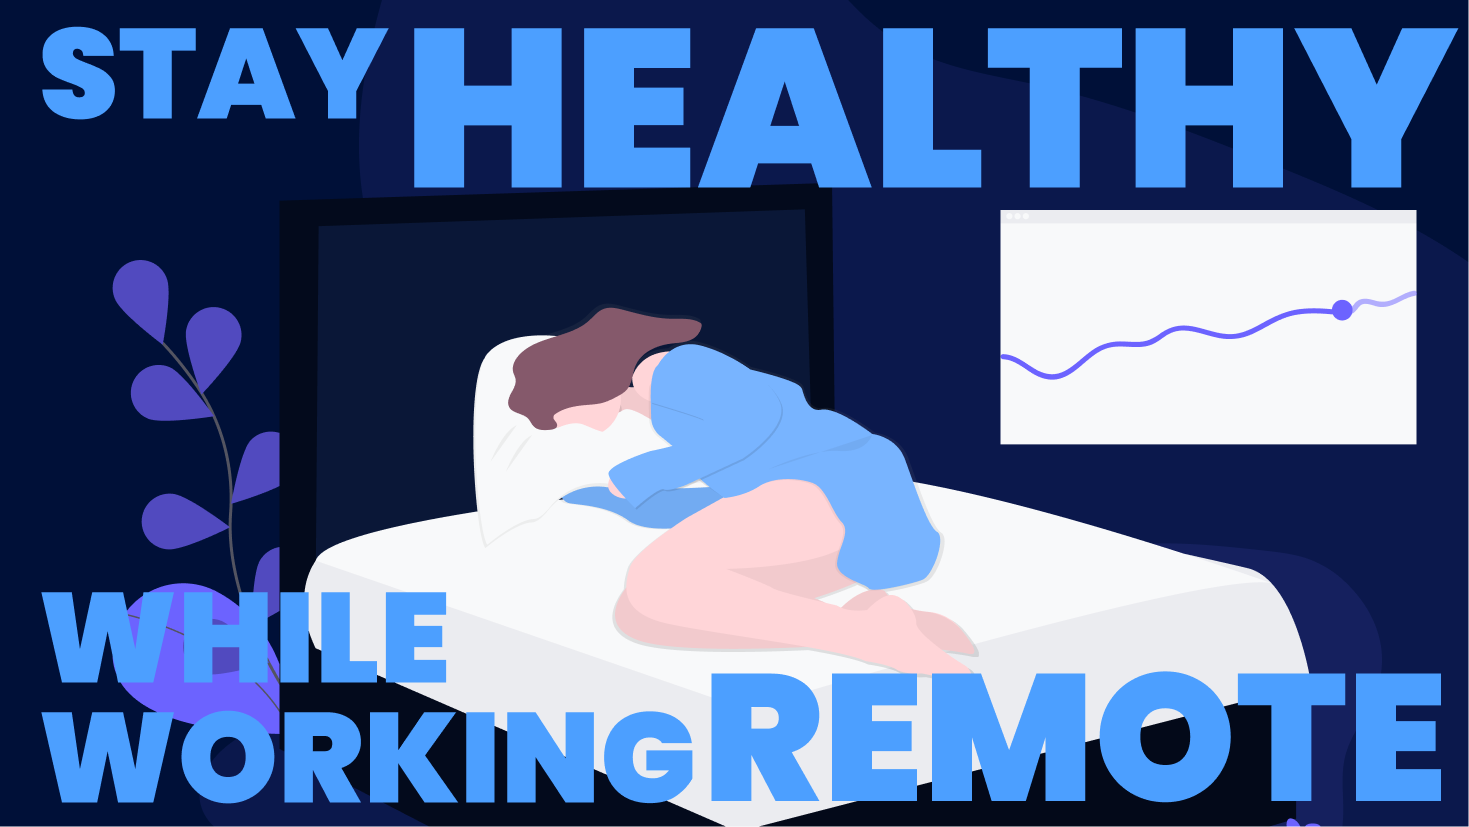 How to stay healthy while working remotely